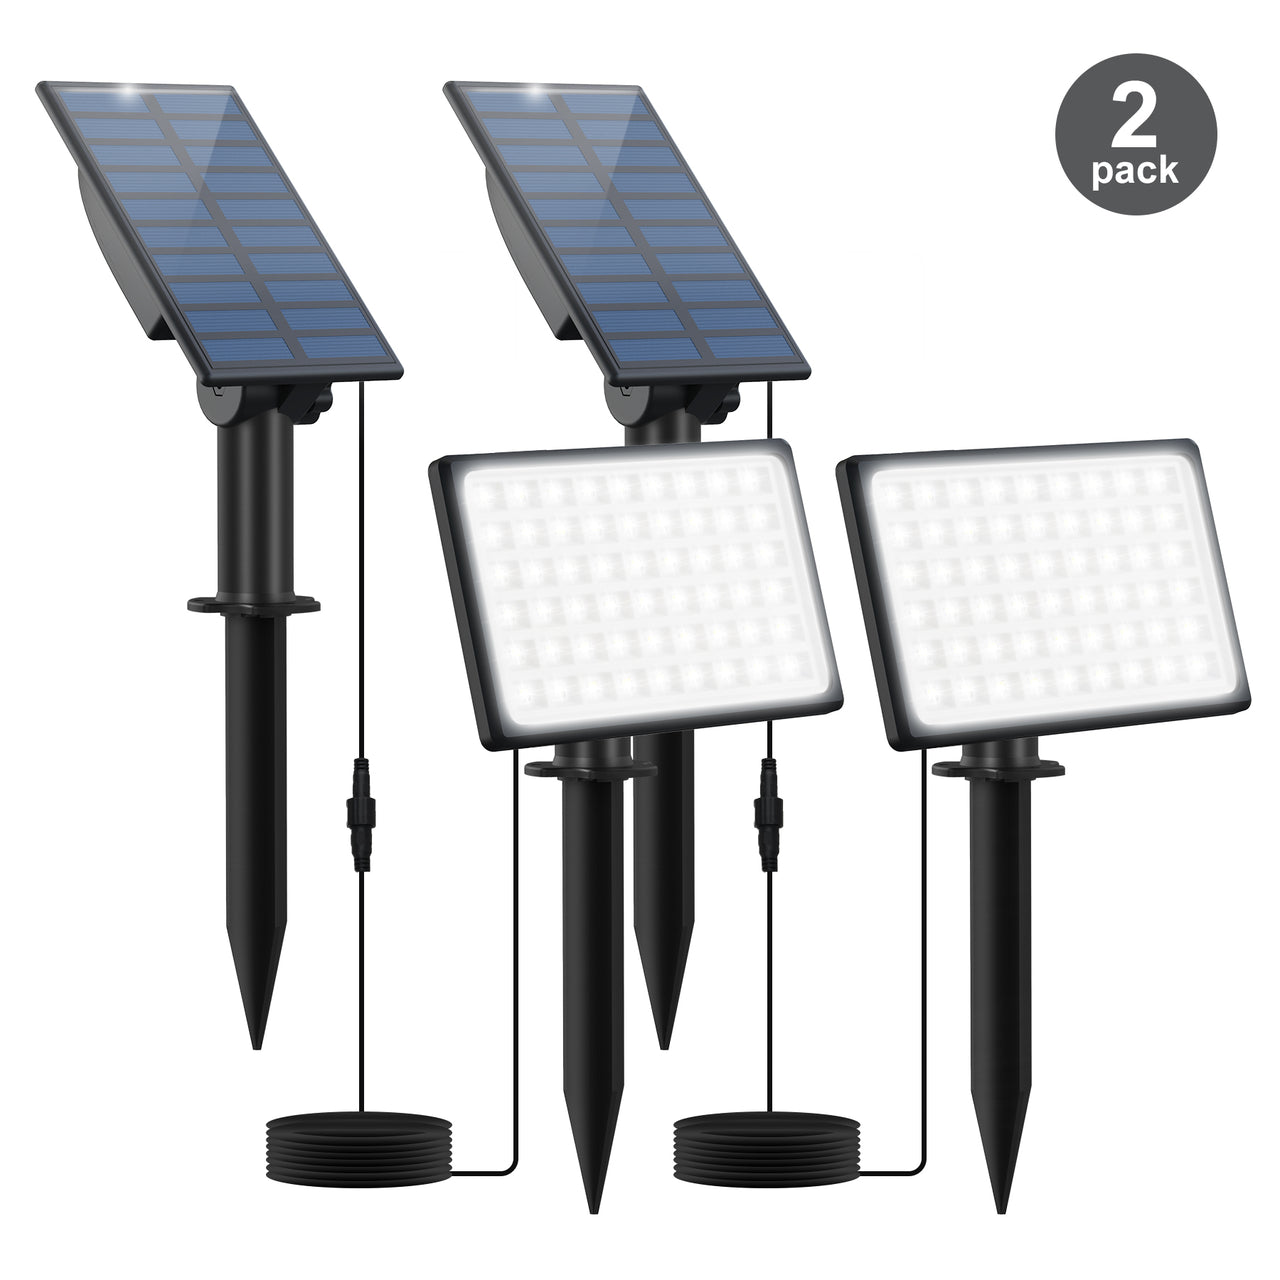 TSUN 54 LEDs Solar Security Lights with Separate Solar Panel